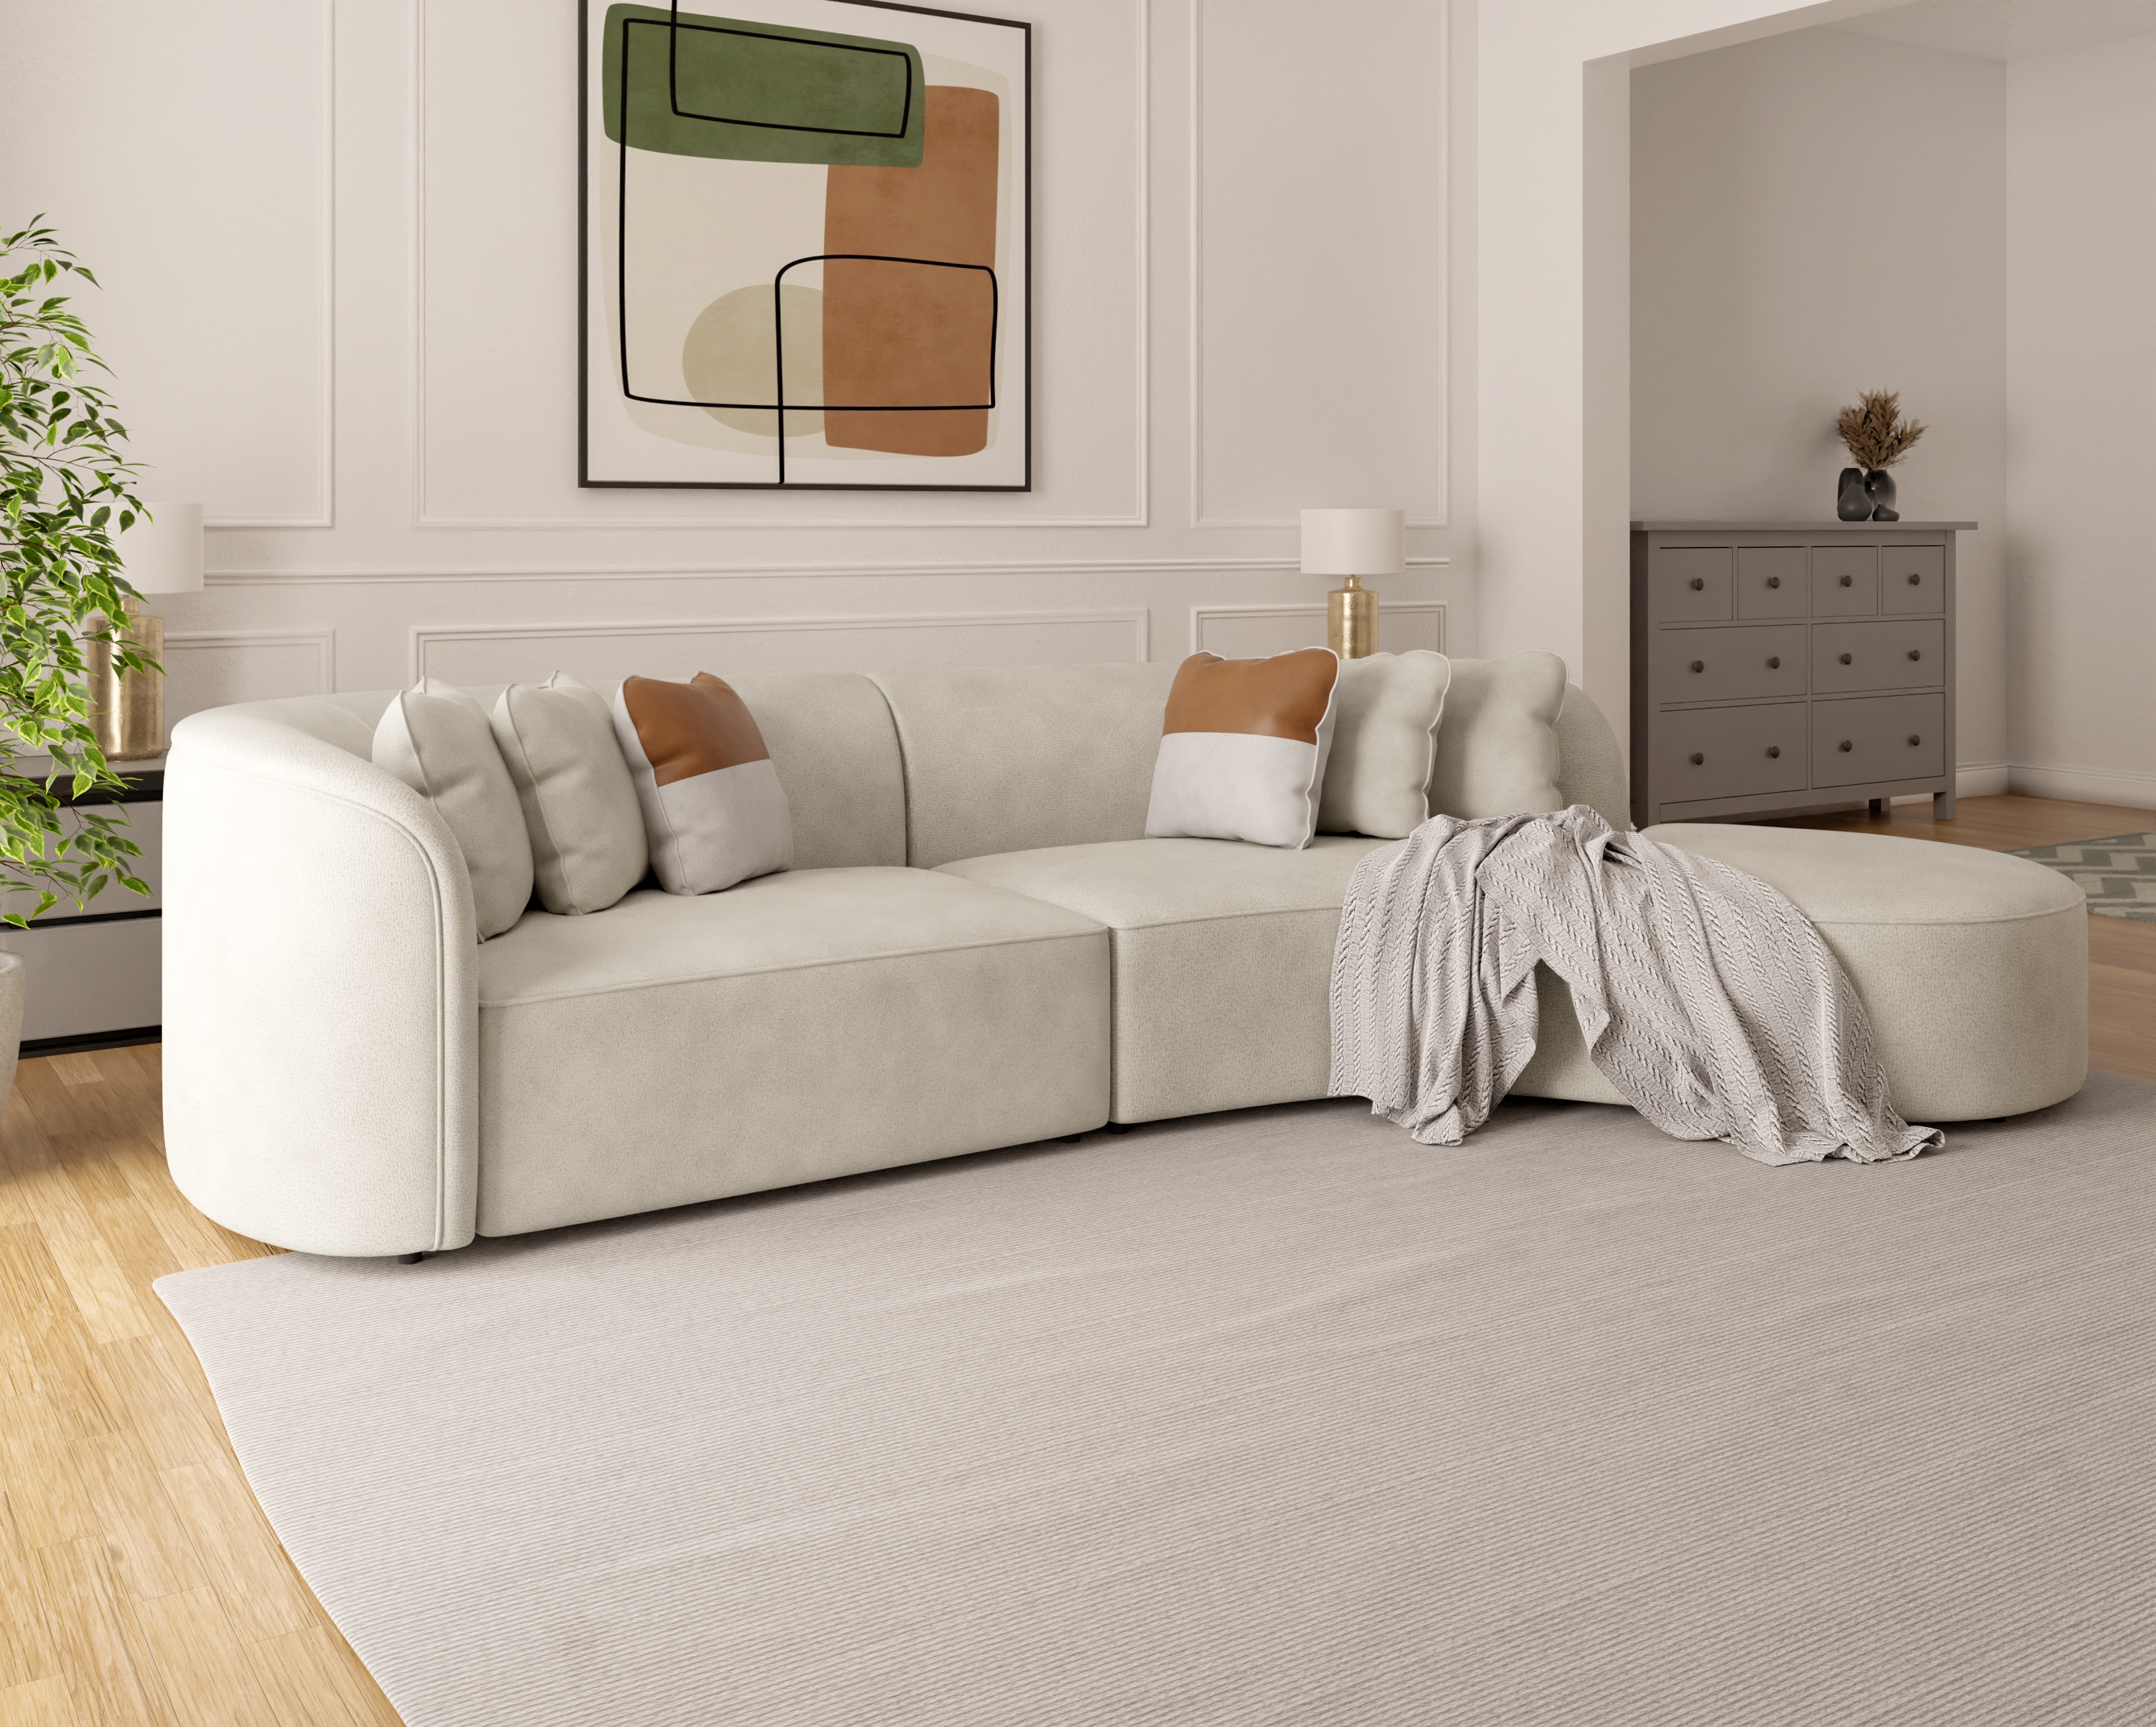 Nevada Curve Sofa Bless Brothers